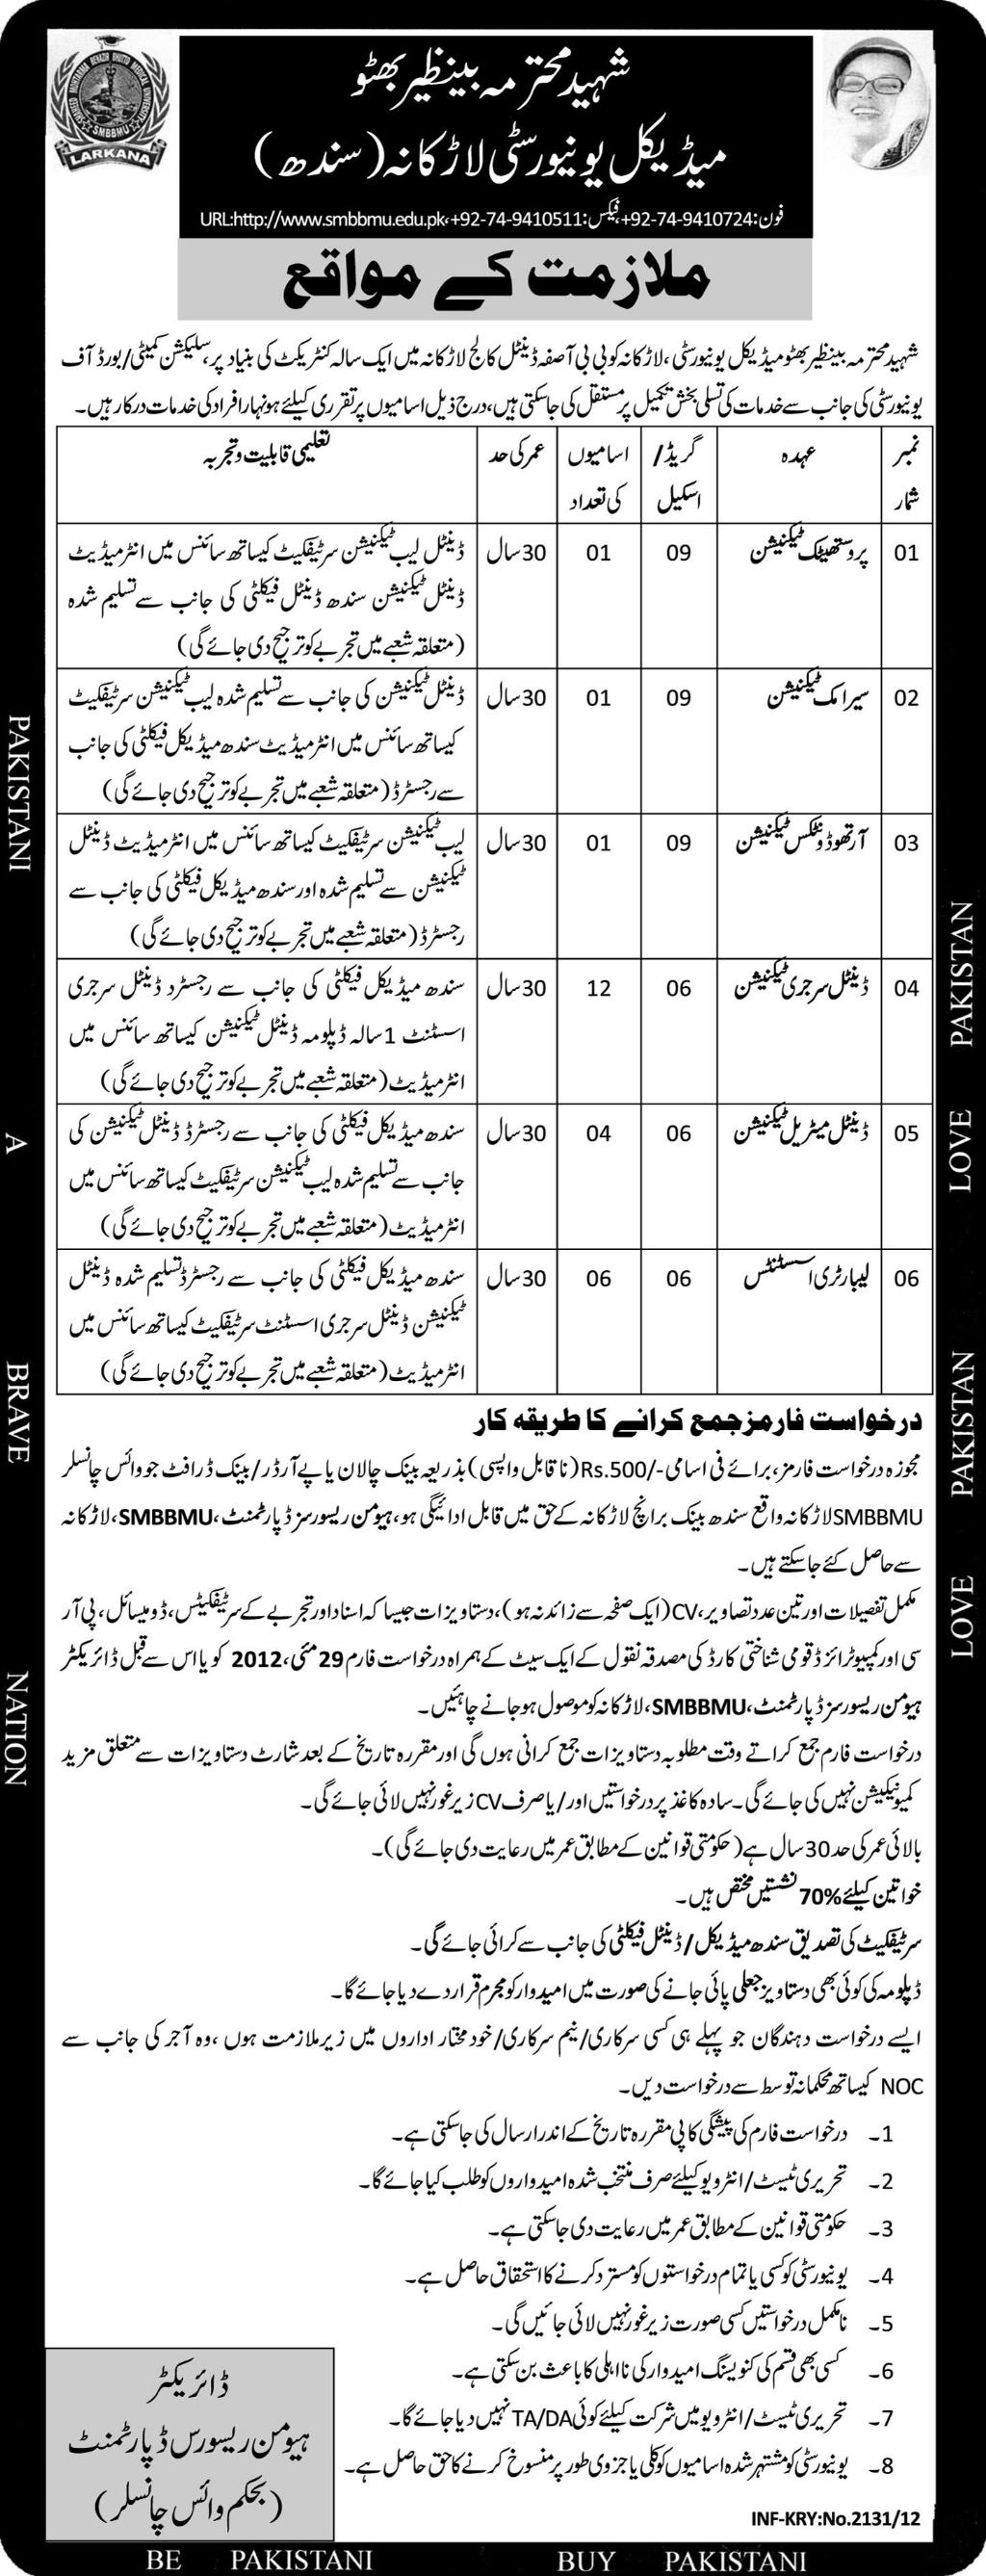 Medical Technicians Required at Shaheed Mohtarma Benazir Bhutto Medical University